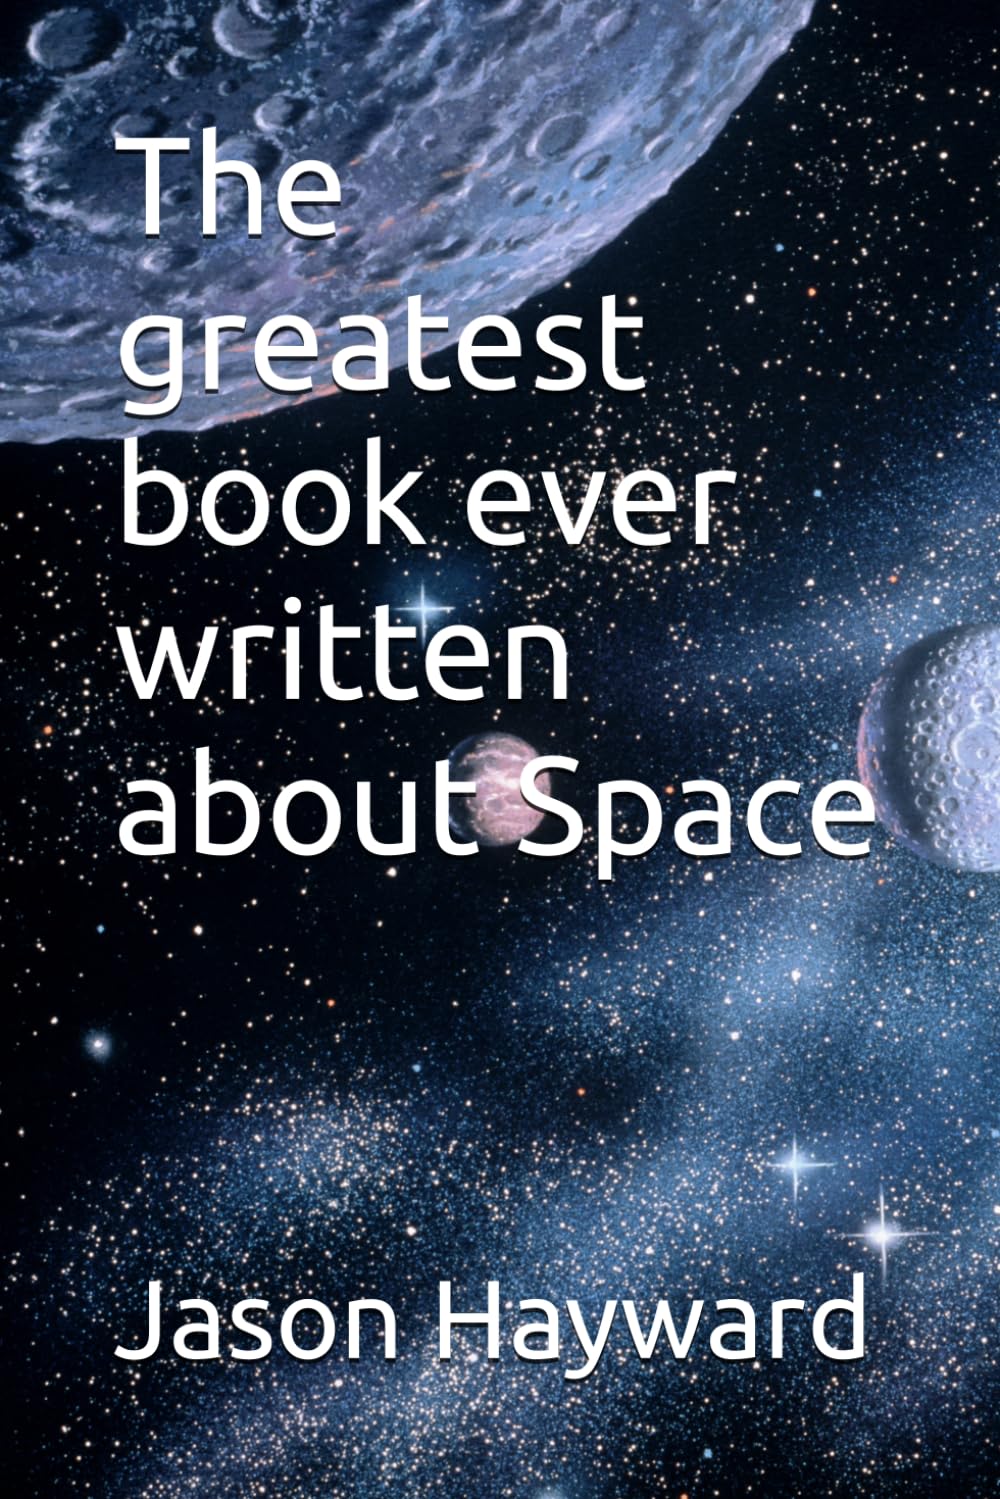 The greatest book ever written about Space